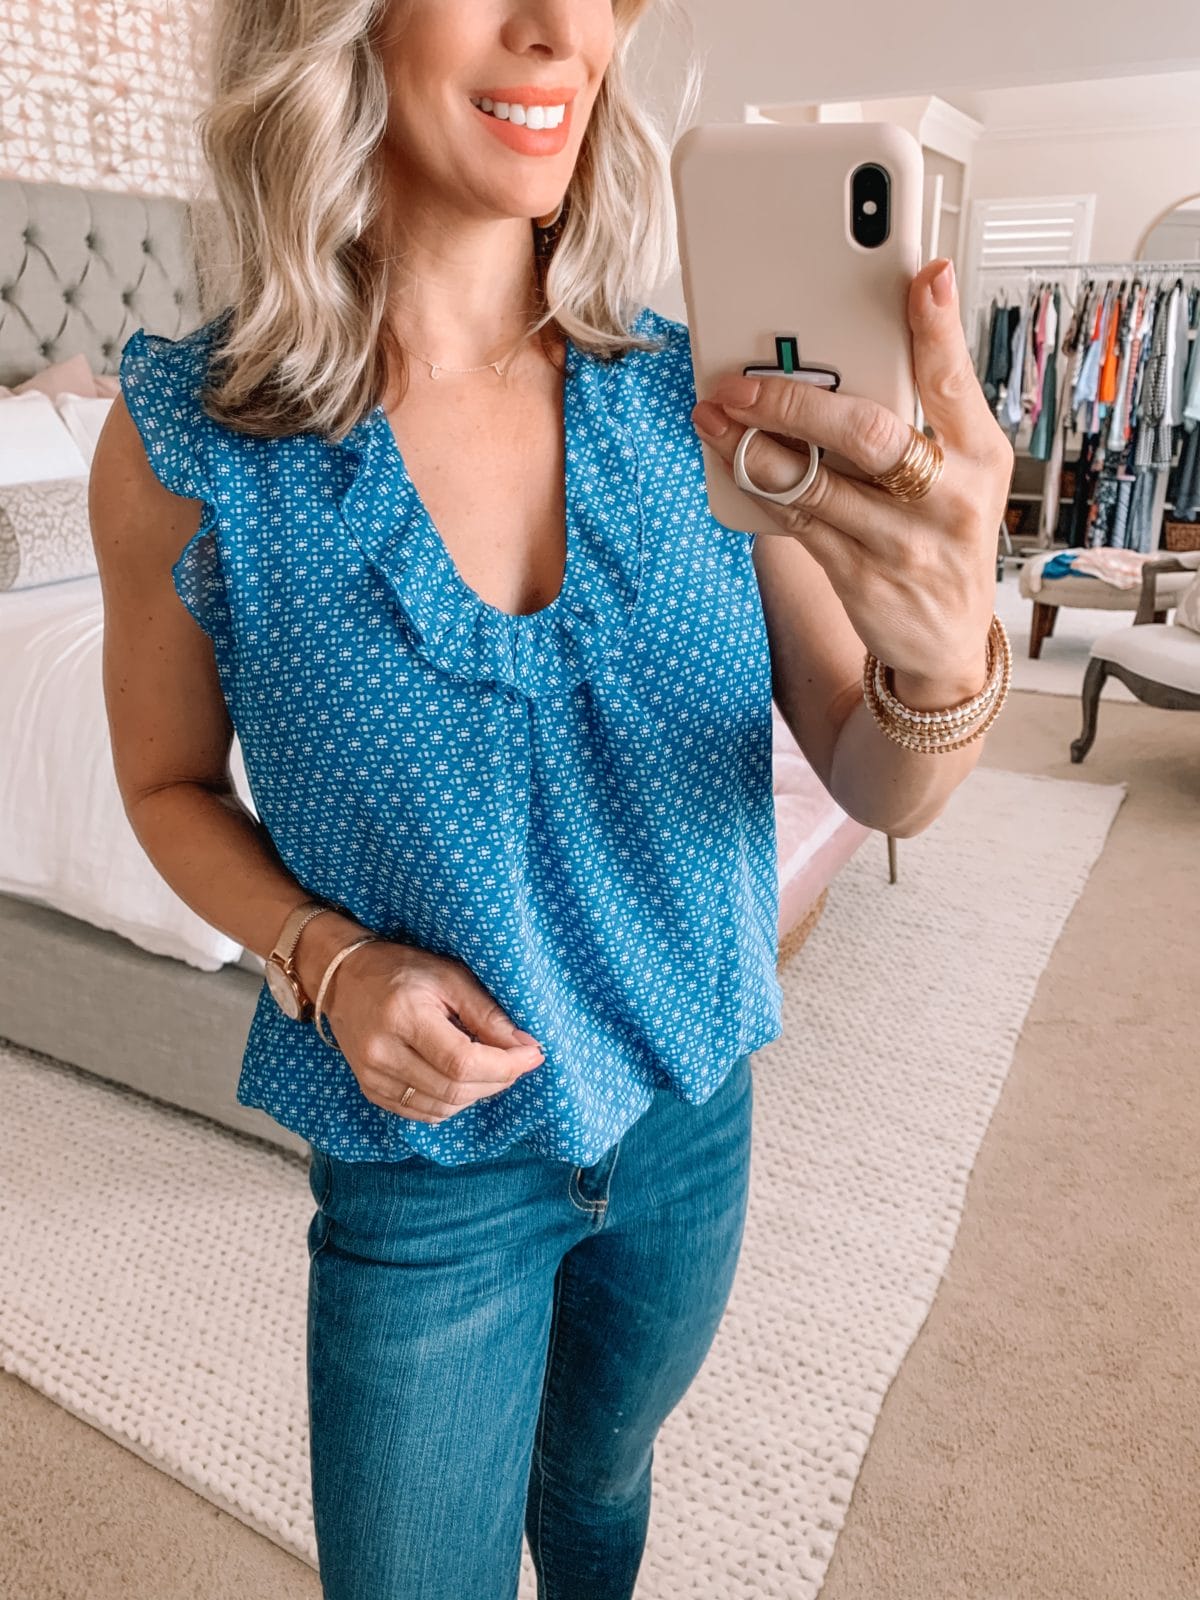 Amazon Fashion Finds, Blue Scoop Ruffle Neck Top, Skinny Jeans